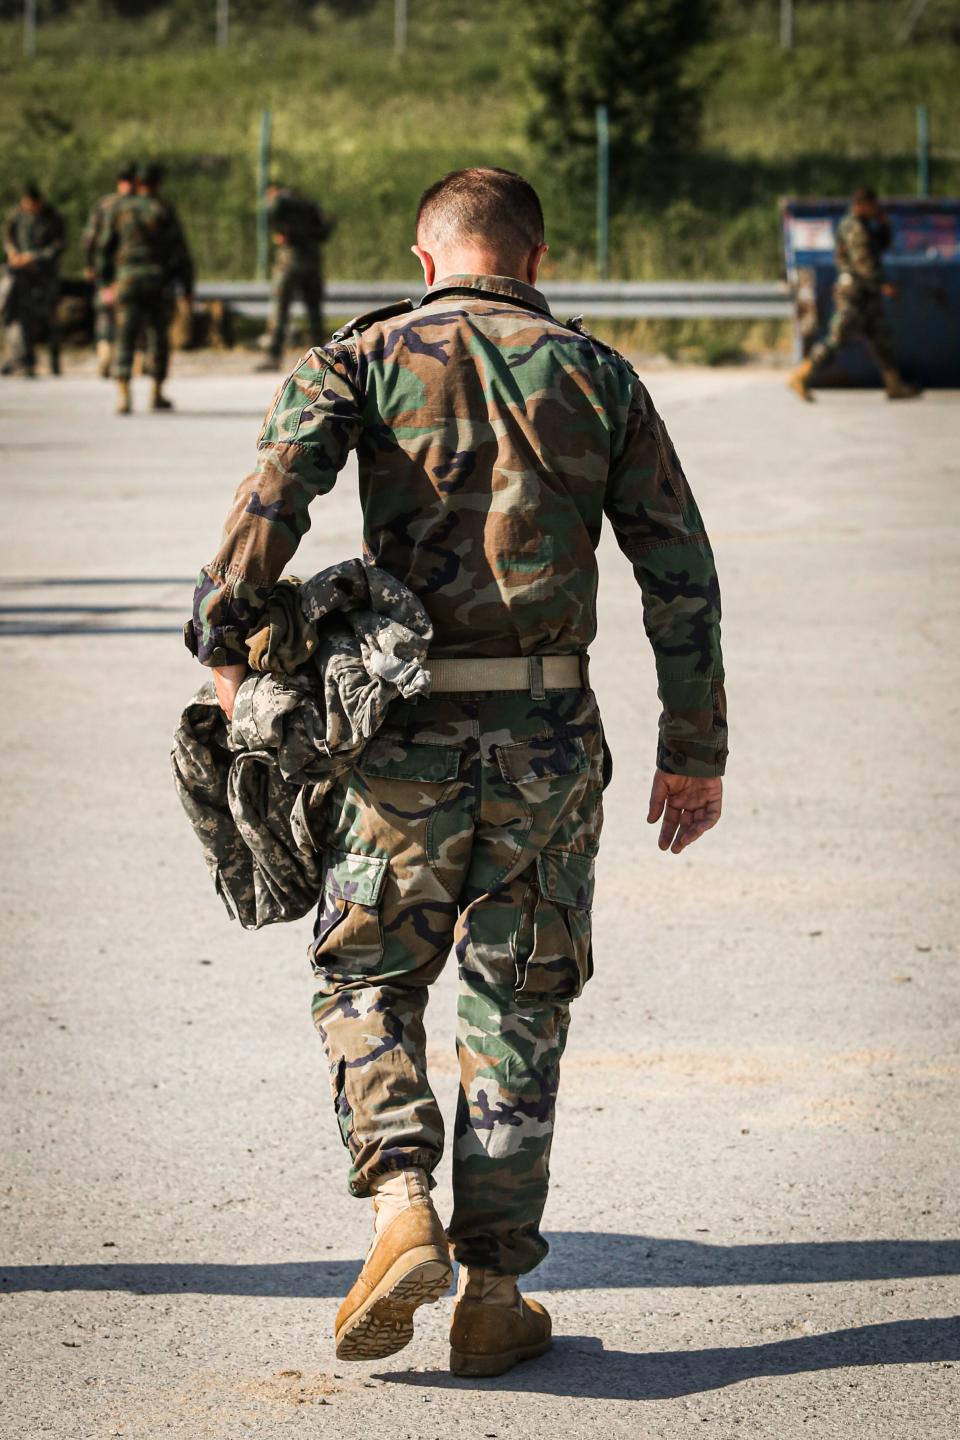 An image of a man in army fatigues walking with his head down and holding fire-resistant clothing in his left hand.